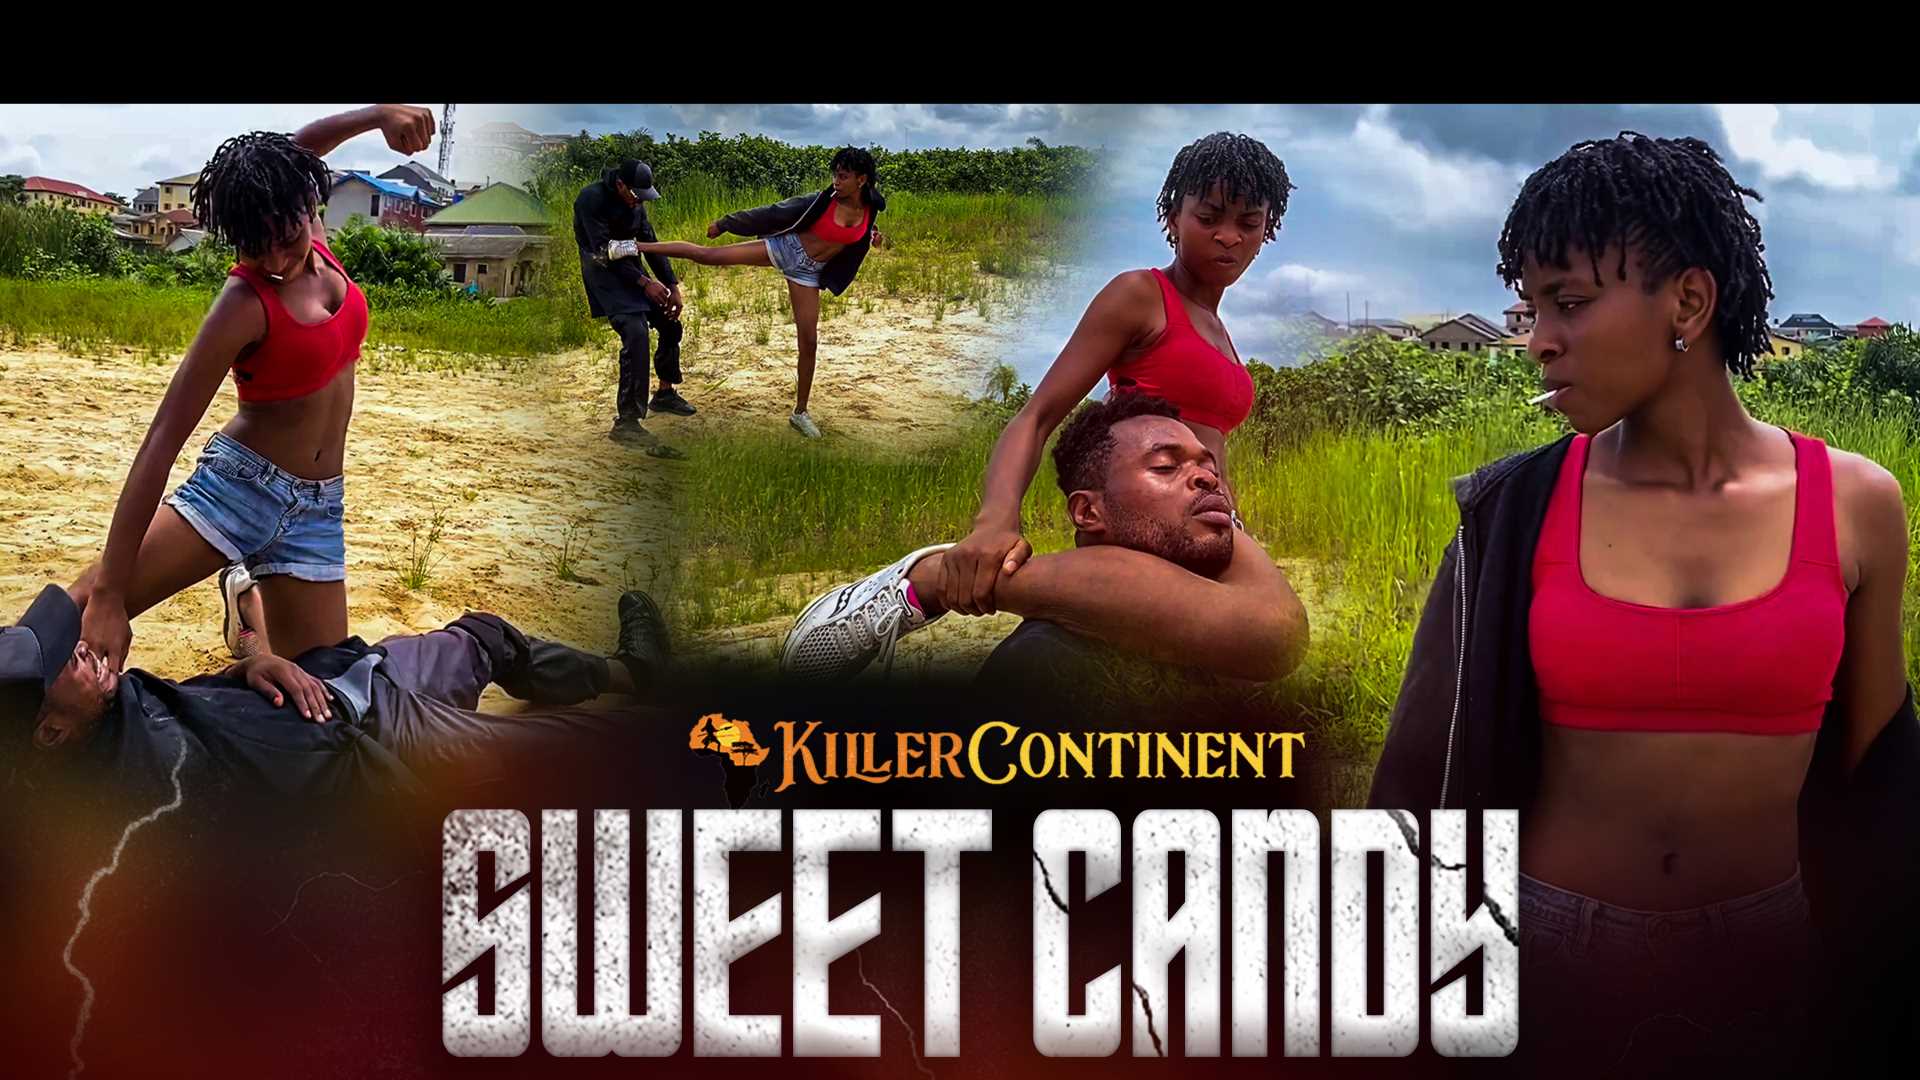 #4 - Sweet Candy